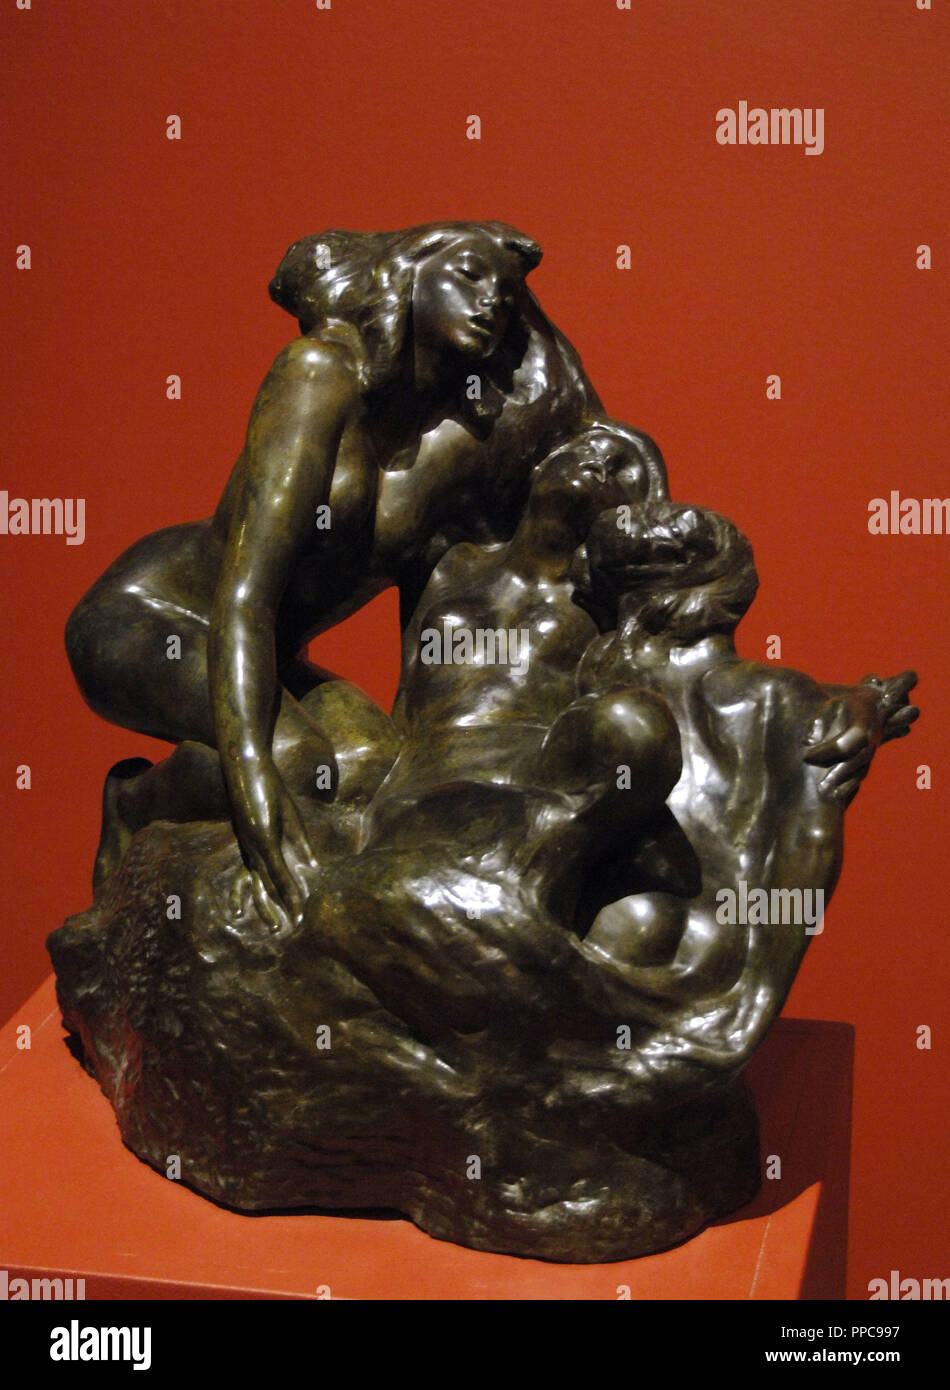 Auguste Rodin (1840-1917). French sculptor. Sirens, (1888). Museum of Fine Arts. Budapest. Hungary. Stock Photo